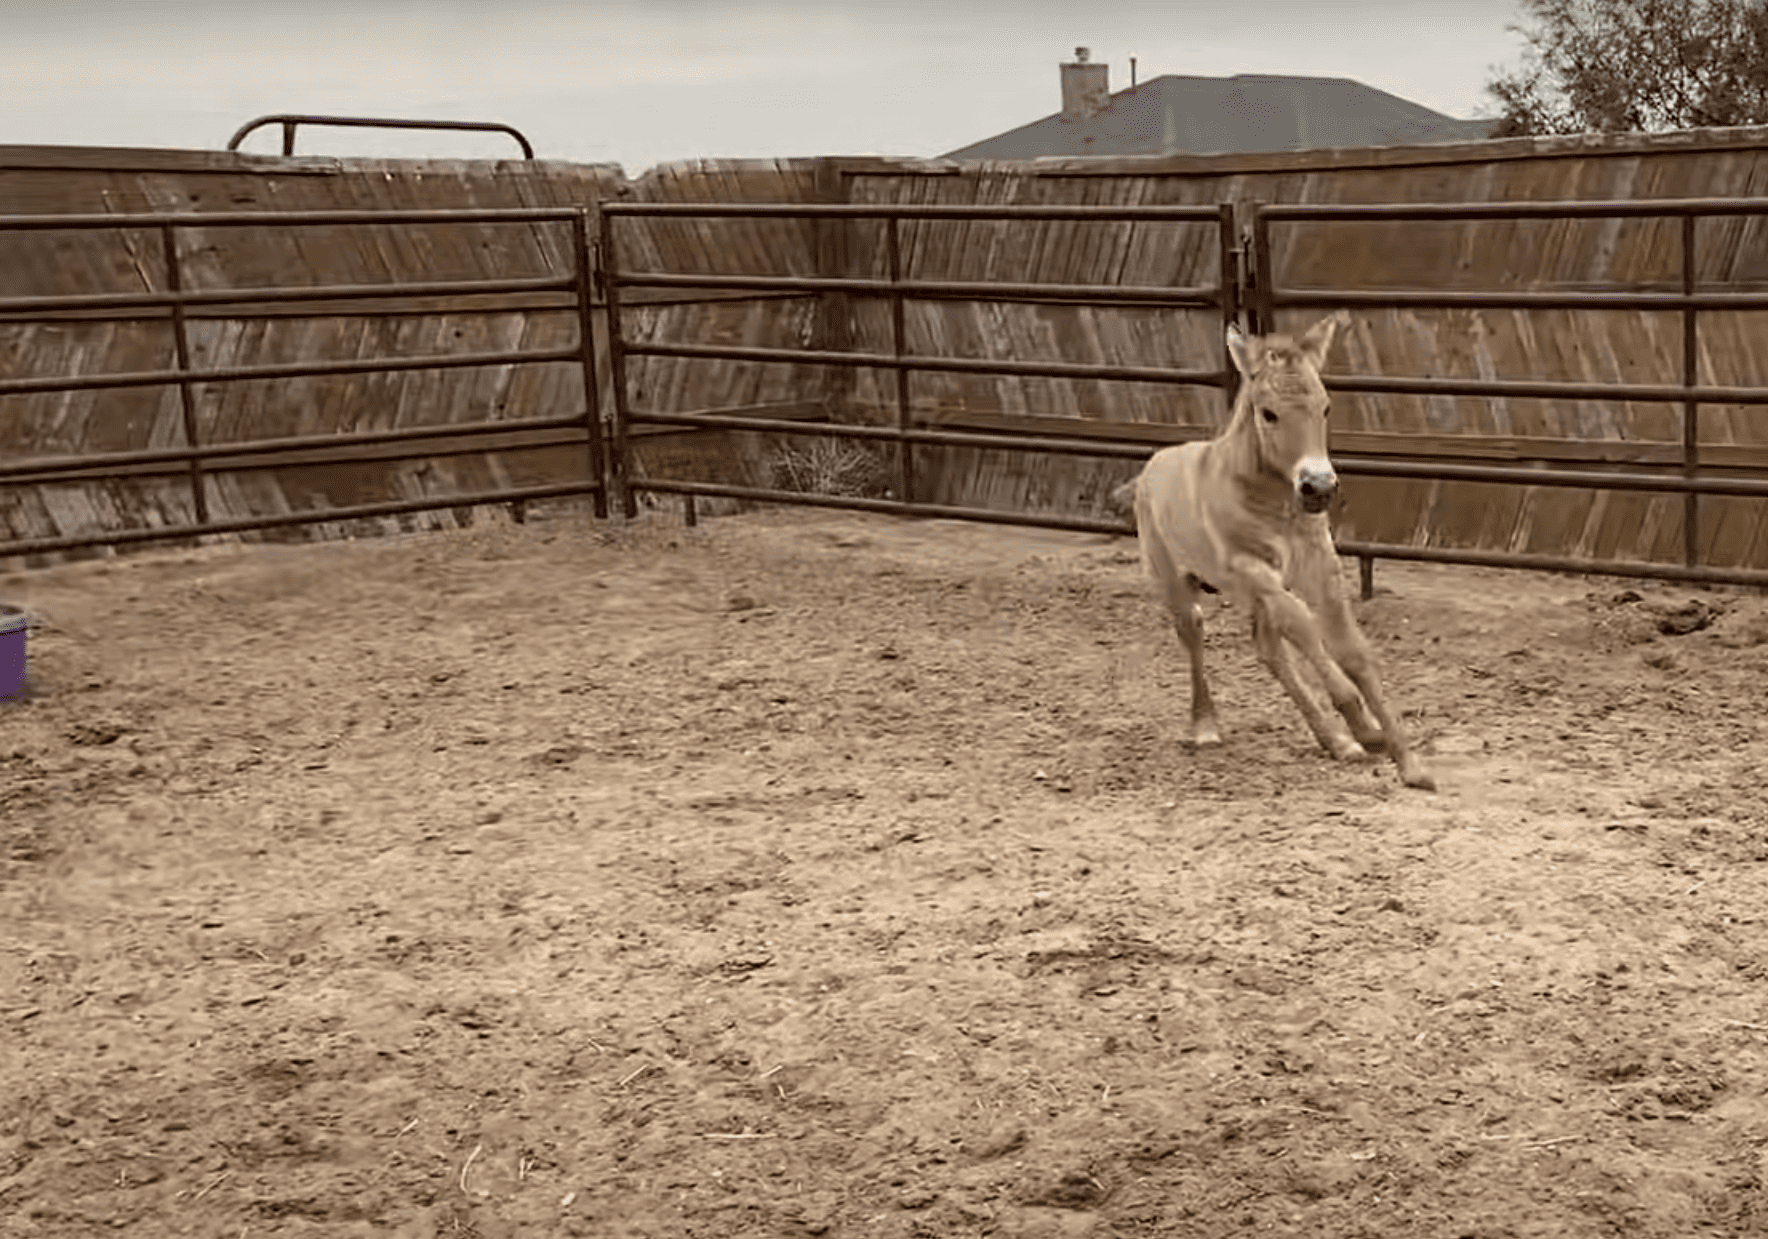 November 11, 2020: 3-month-old Kurt jumps and bucks while his surrogate mother stands by. (Courtesy Timber Creek Veterinary)